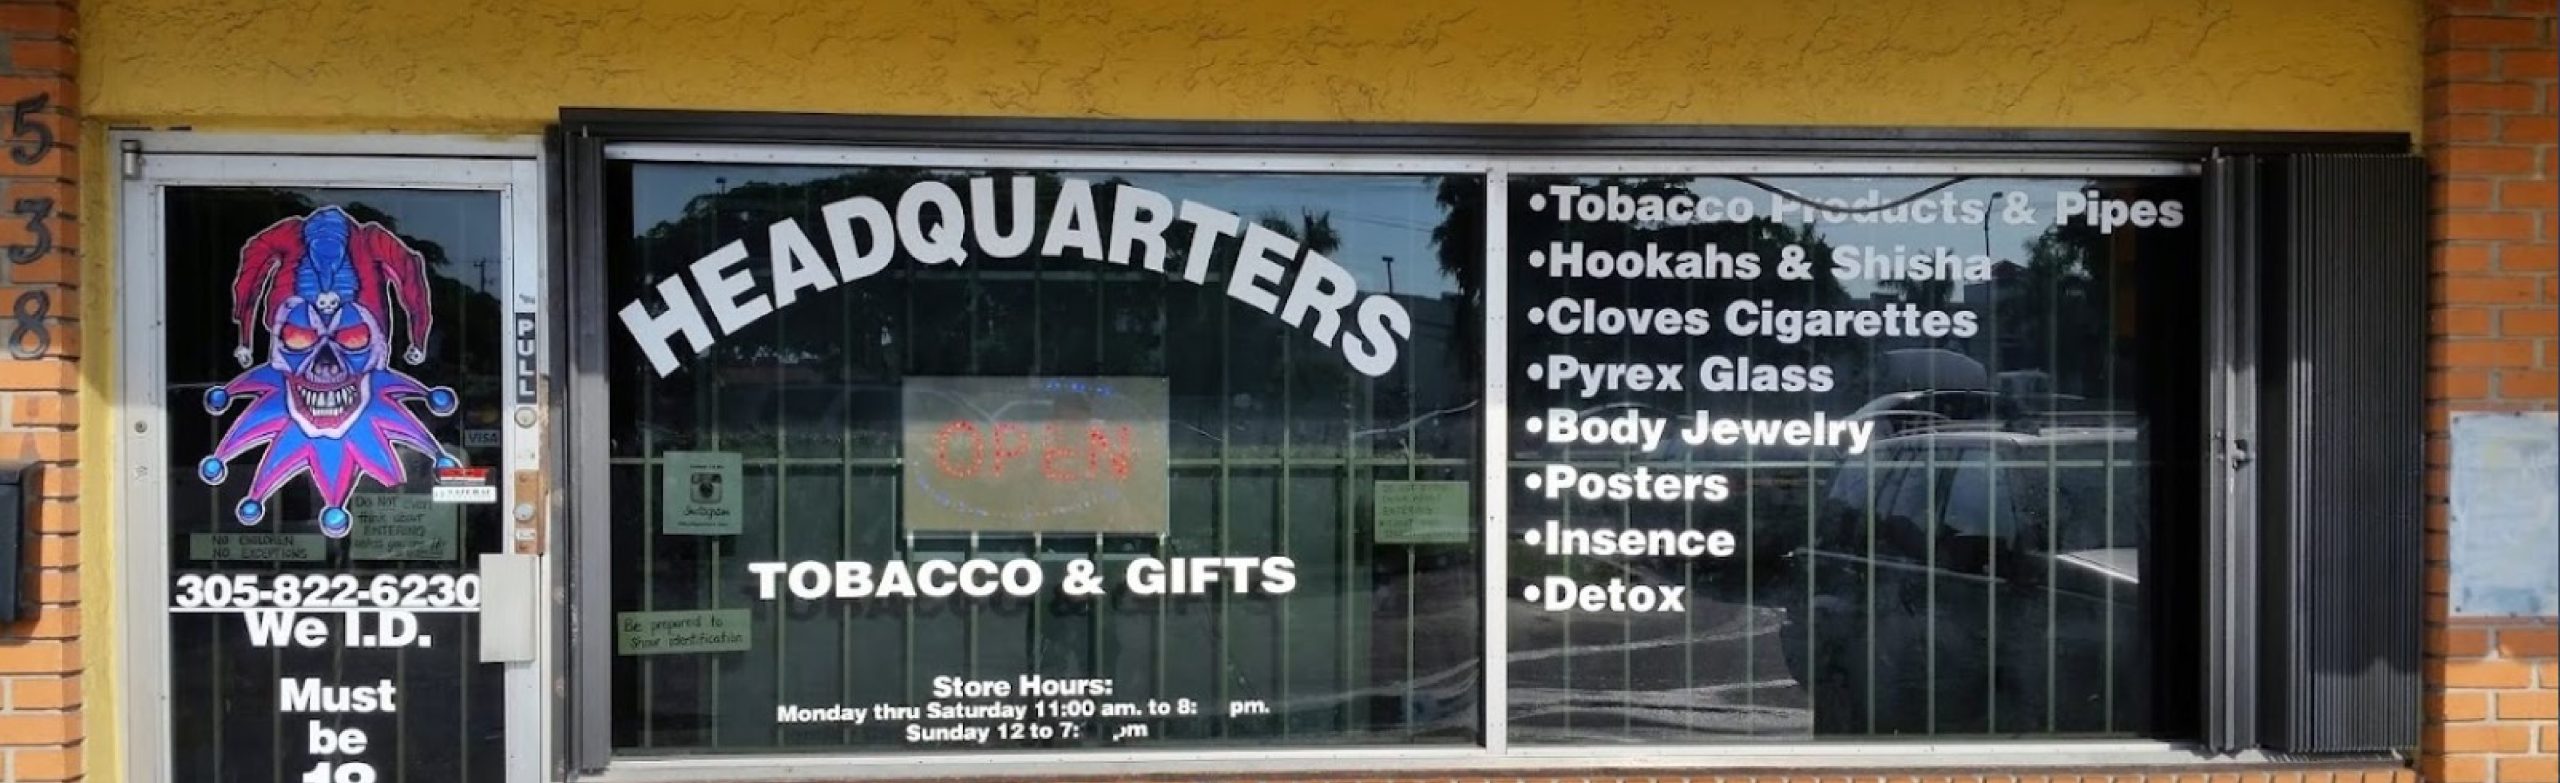 image of headquarters tobacco & gifts in hialeah fl